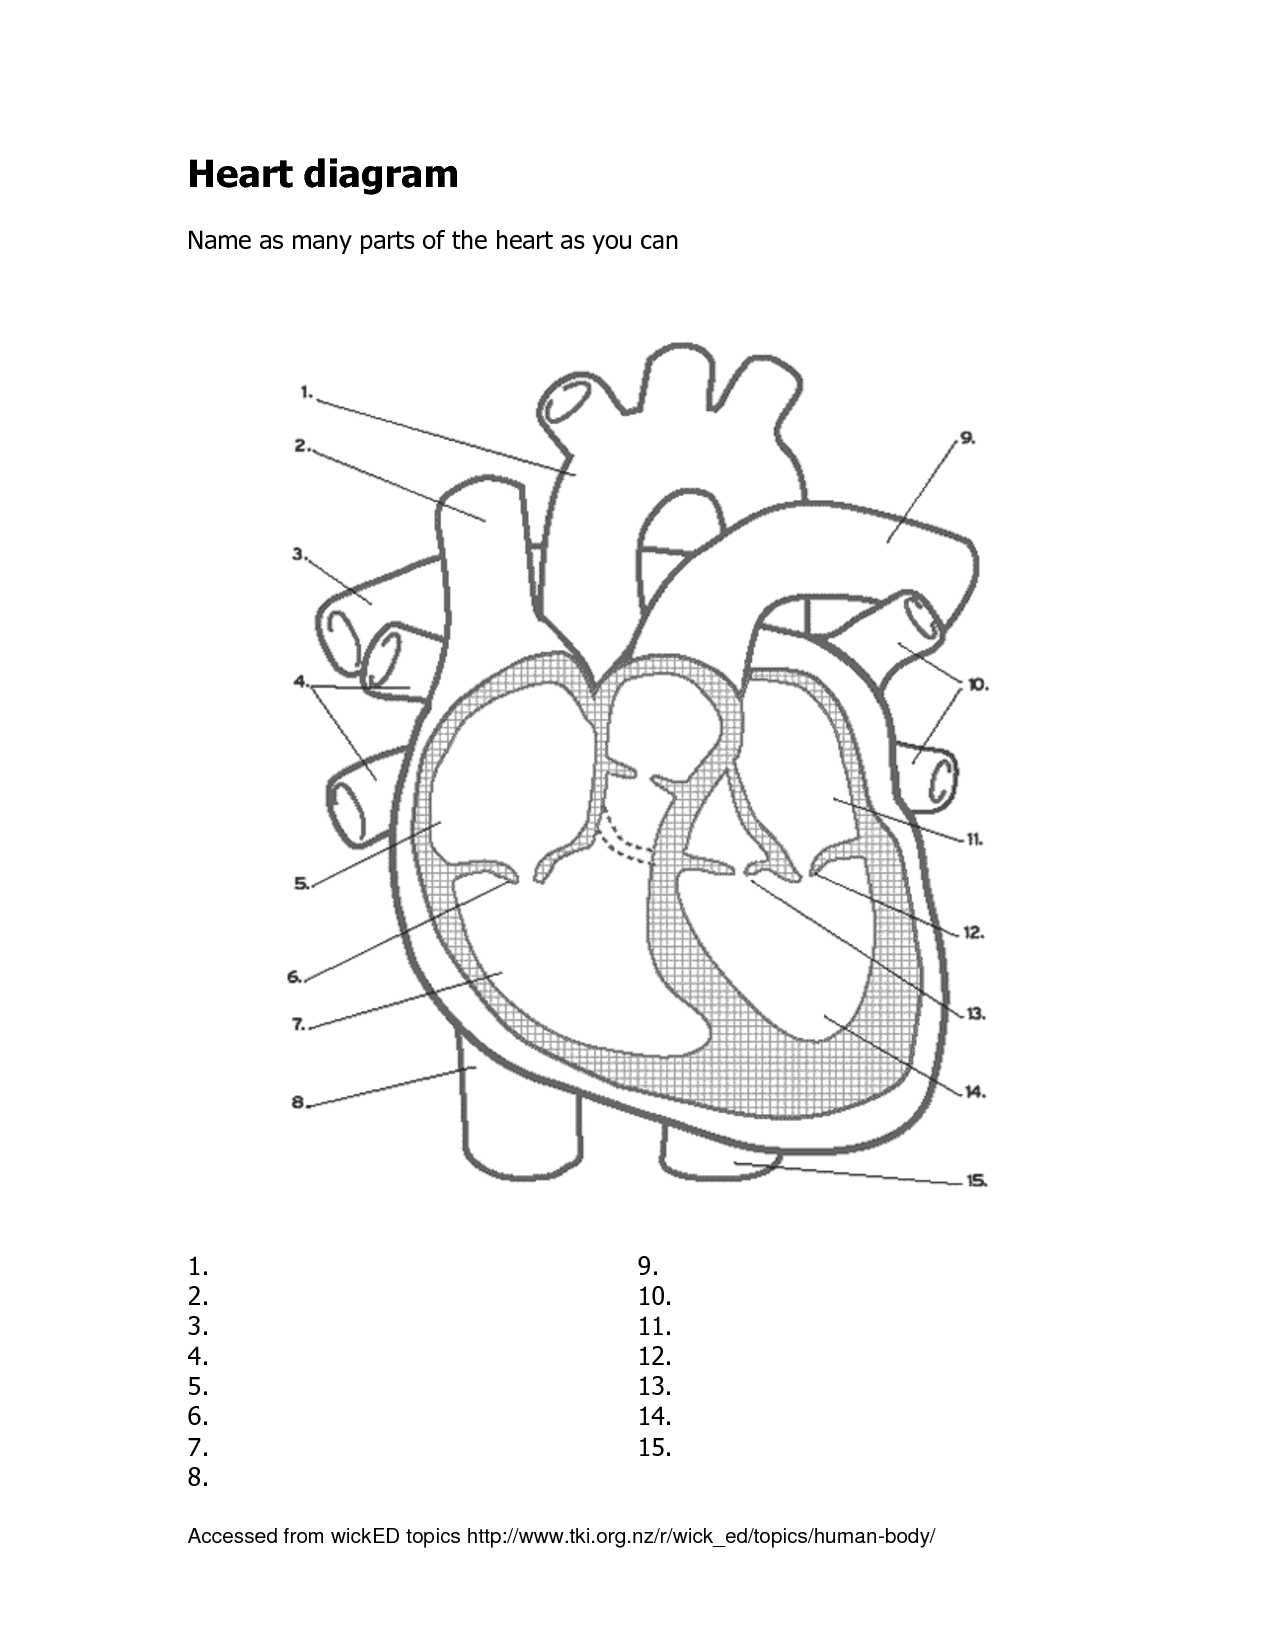 Heart Diagram Related Keywords  Suggestions - Heart Diagram Long 